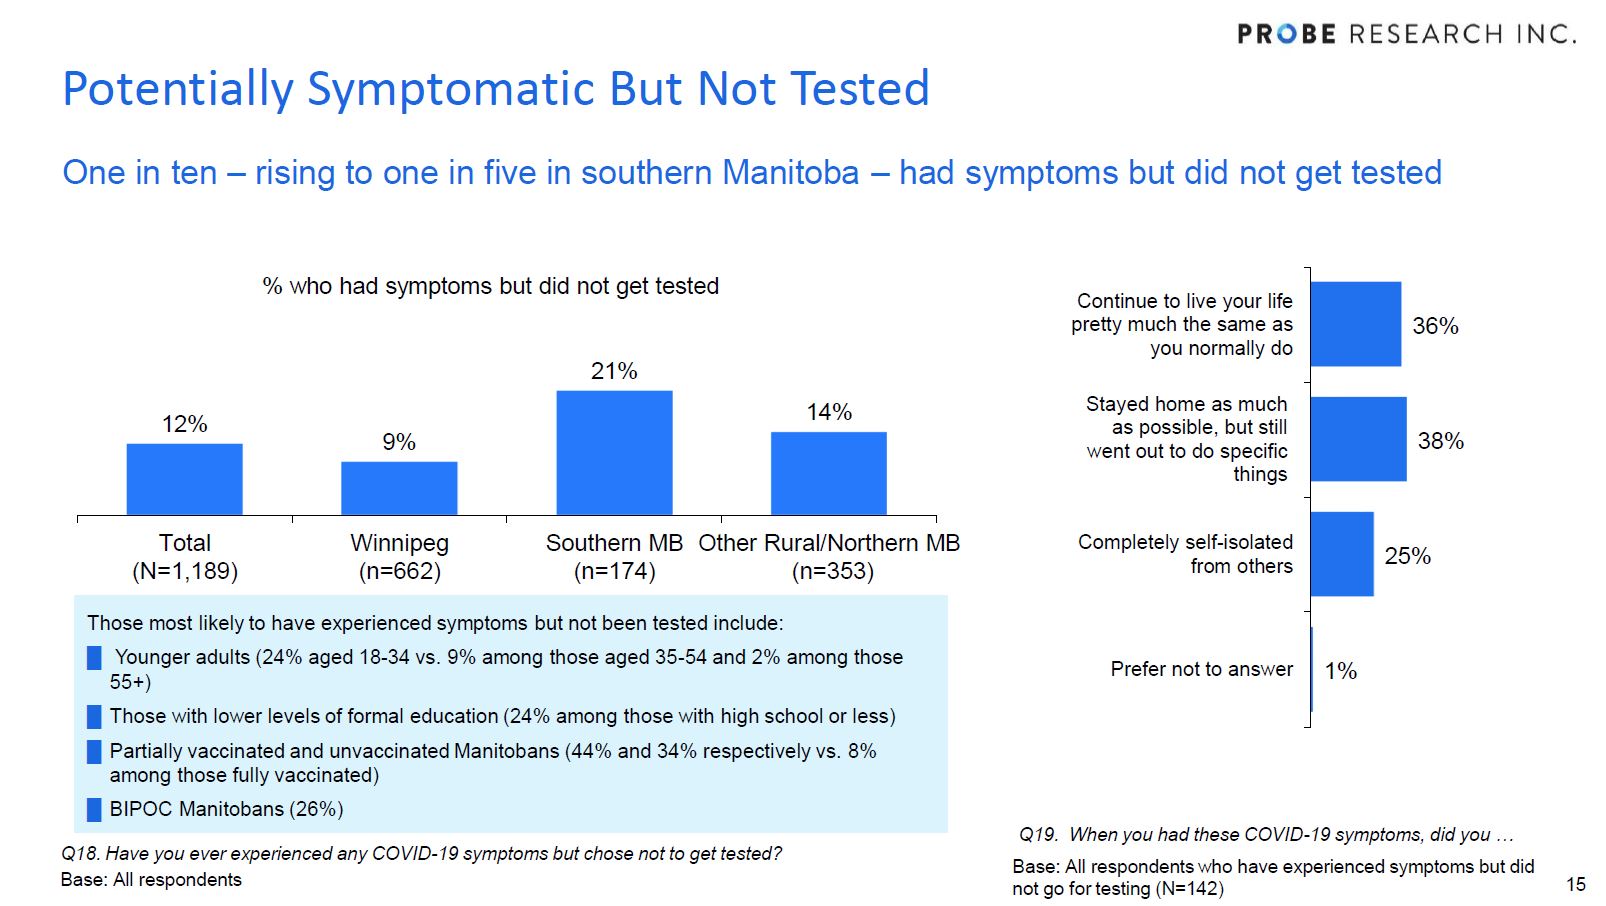 graph of those symptomatic who did not get tested